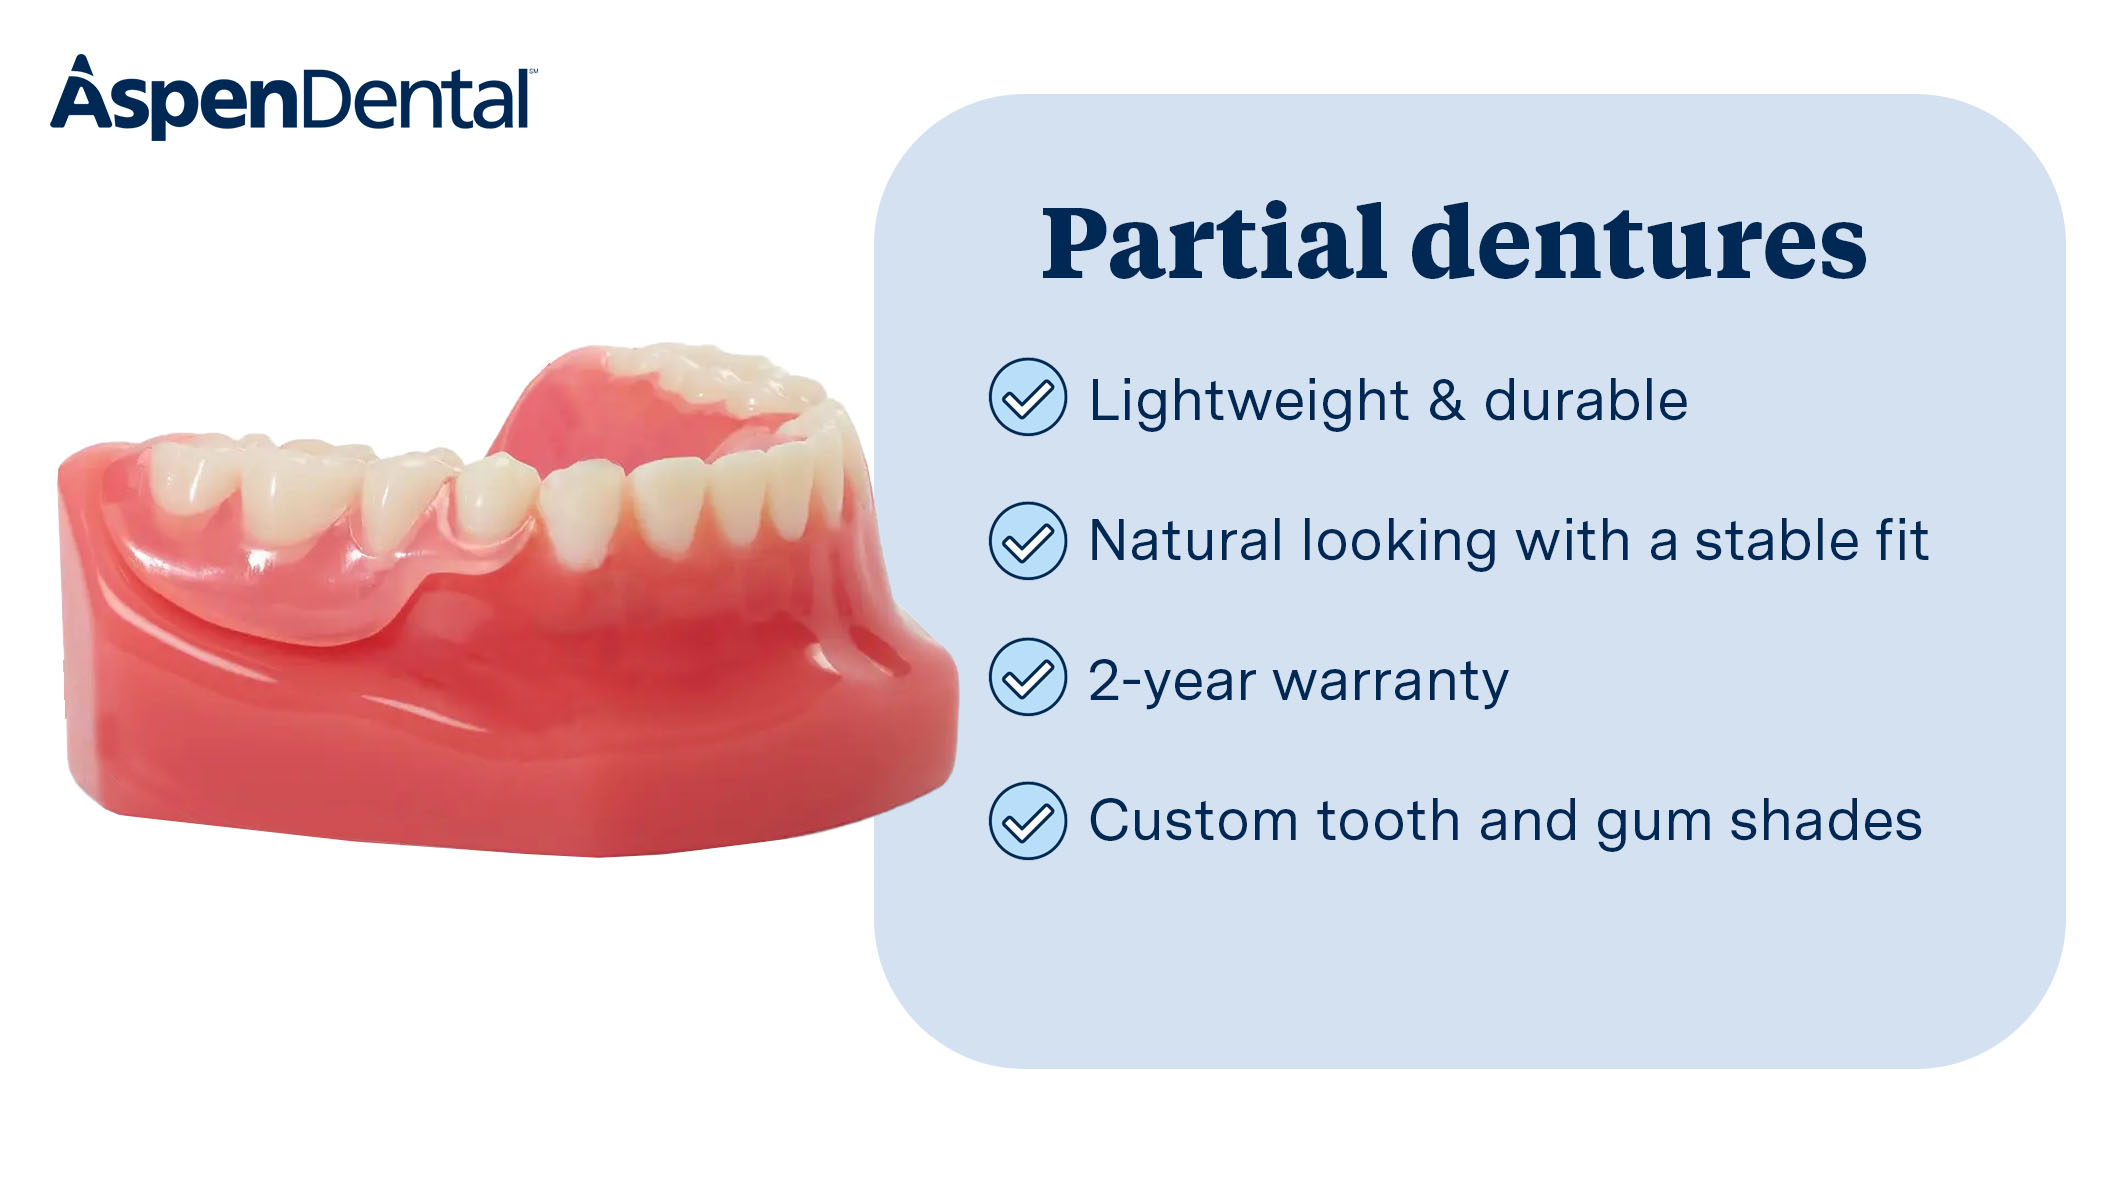 Restore your smile with our customizable partial dentures. Lightweight, durable, natural-looking, an Aspen Dental - Euless, TX Euless (817)786-0837